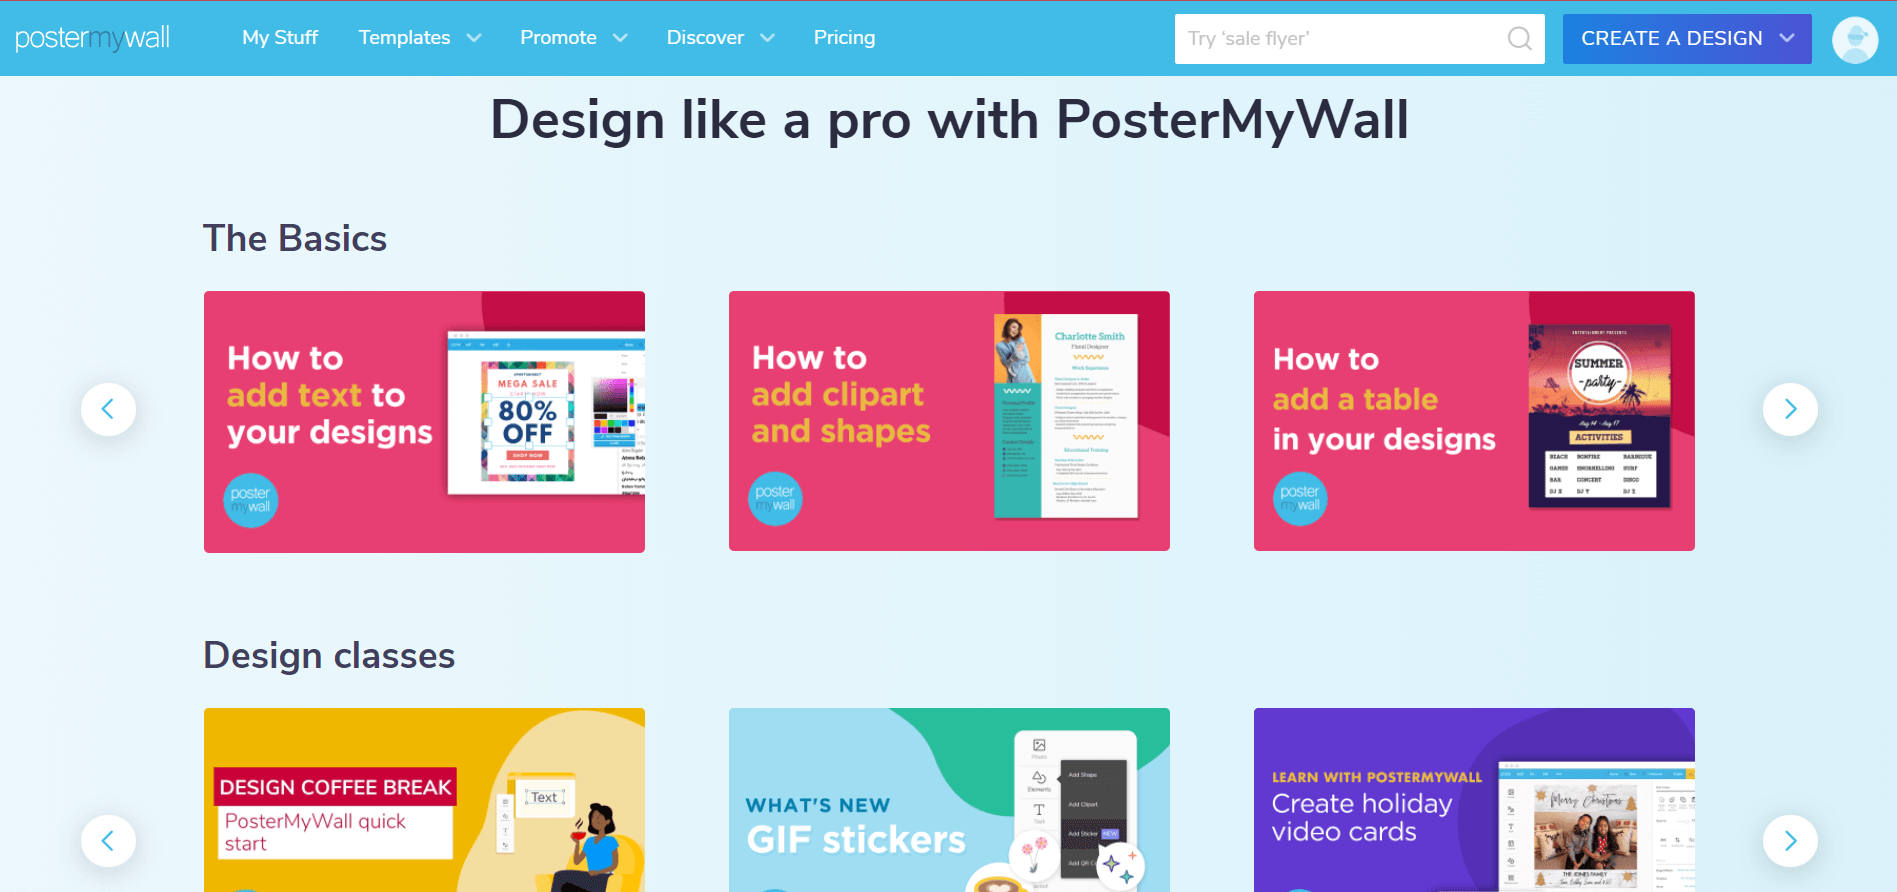 postermywall is the one of the best tool for graphics and creatives builder